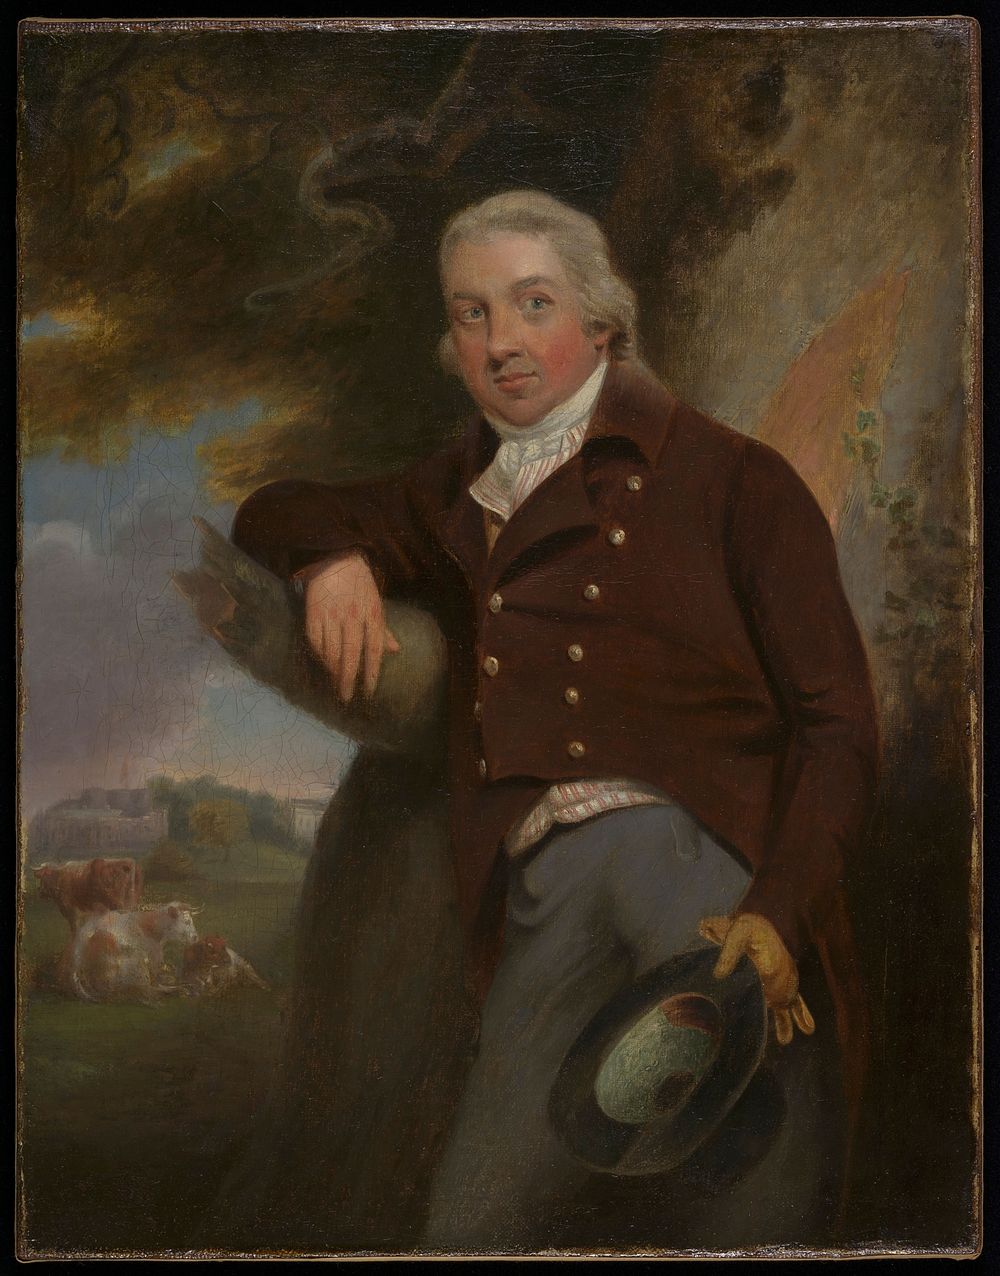 Edward Jenner, with a view of Berkeley, Glos. Oil painting attributed to John Raphael Smith.